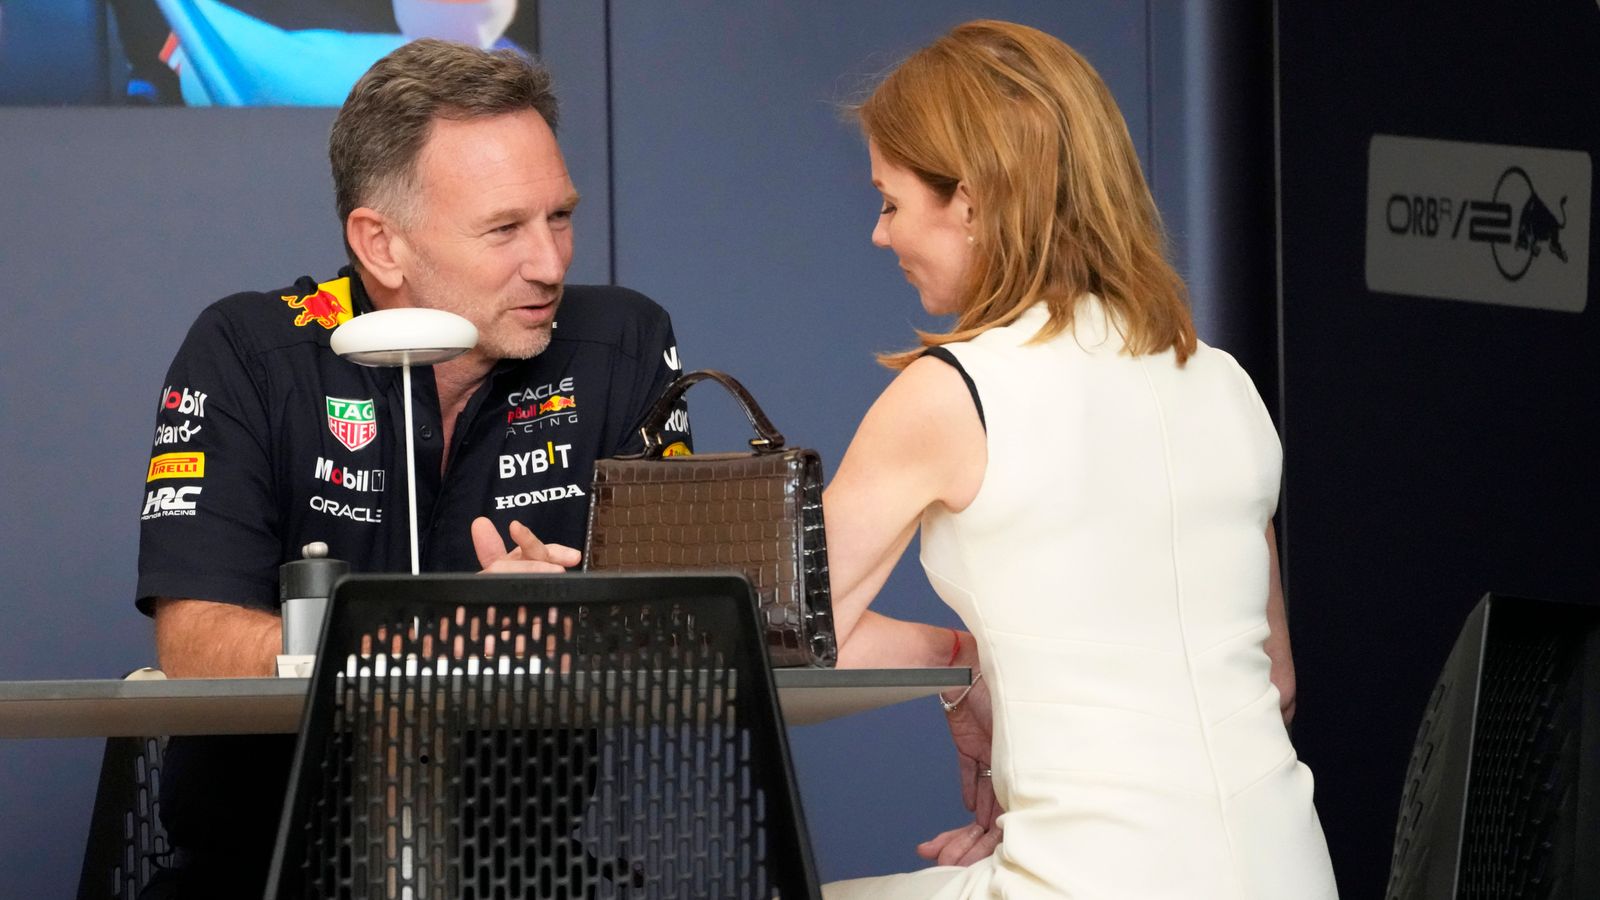 Christian Horner 'absolutely' expects to remain in charge after claims of inappropriate behaviour